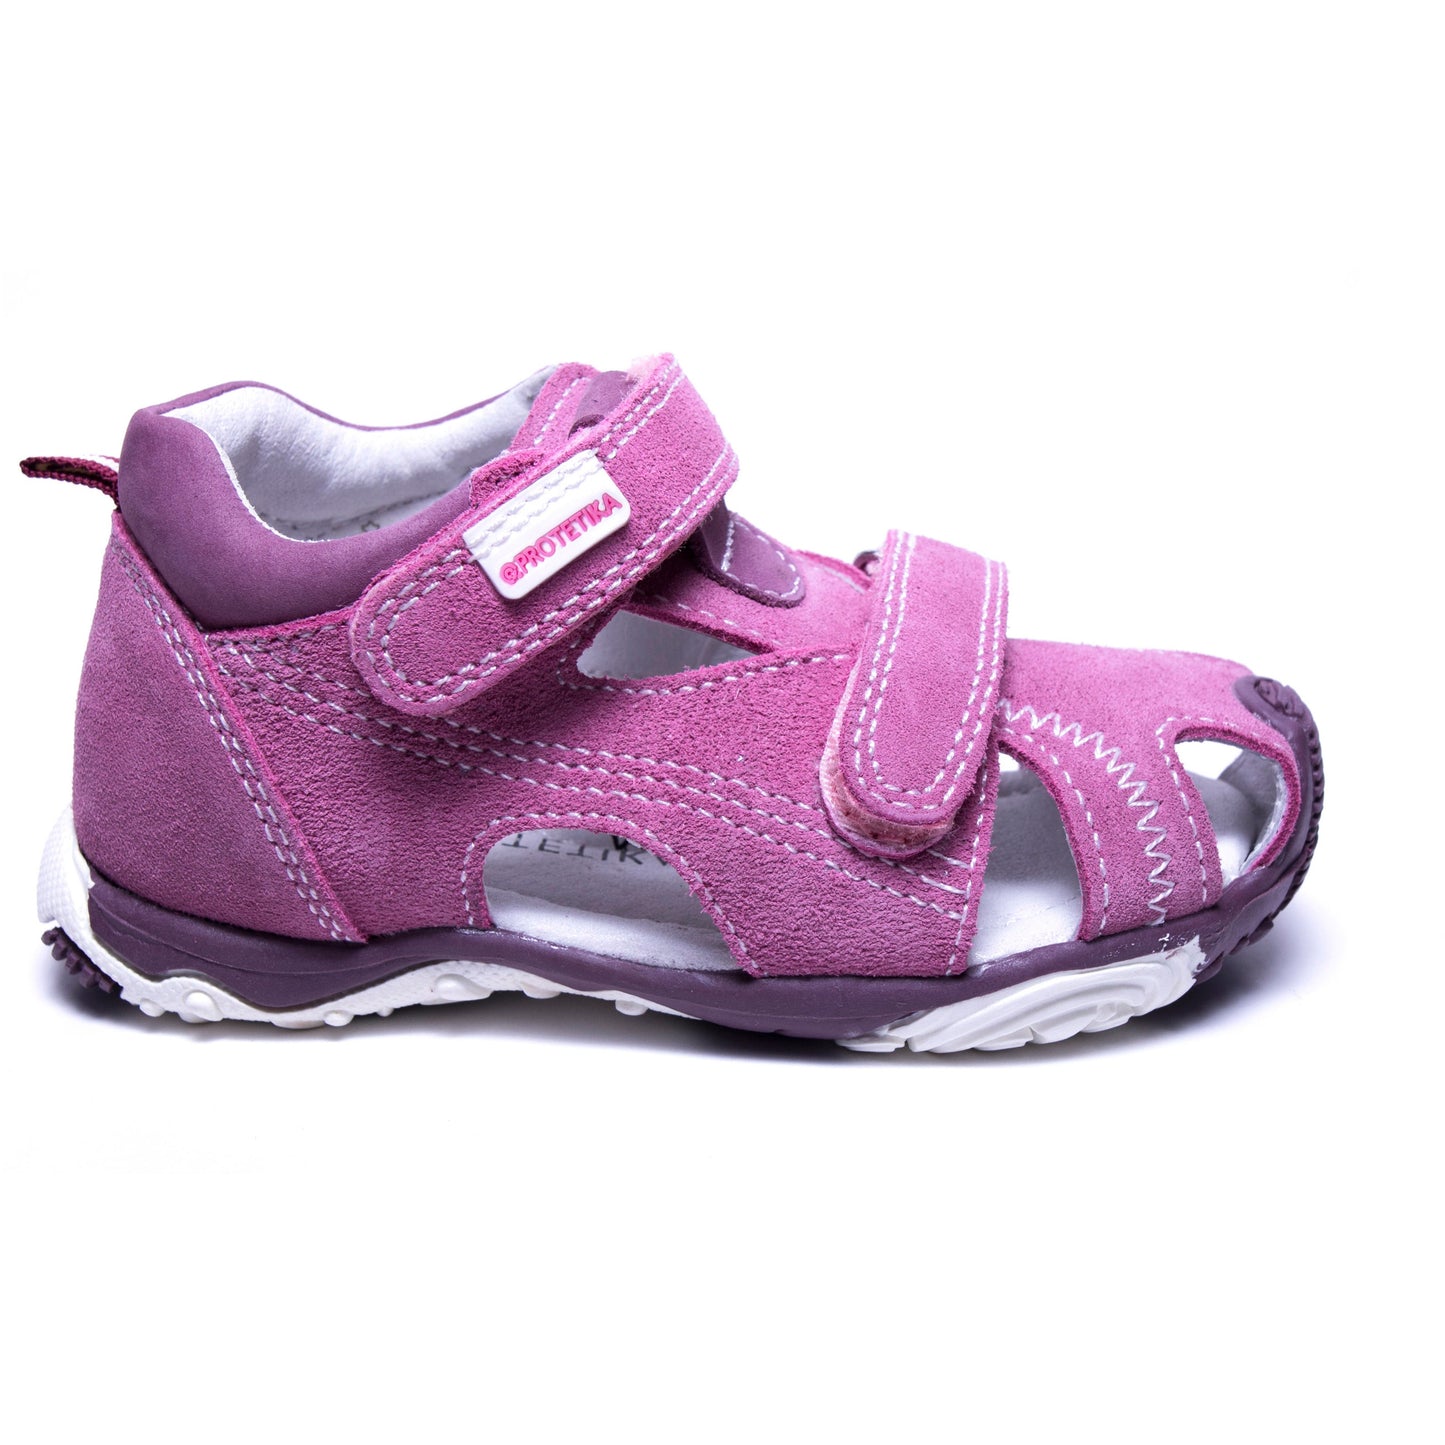 A practical purple colour of a toddler girl everyday sandal and a mild arch support with a firm heel is a match made in heaven for your young toddler girl.